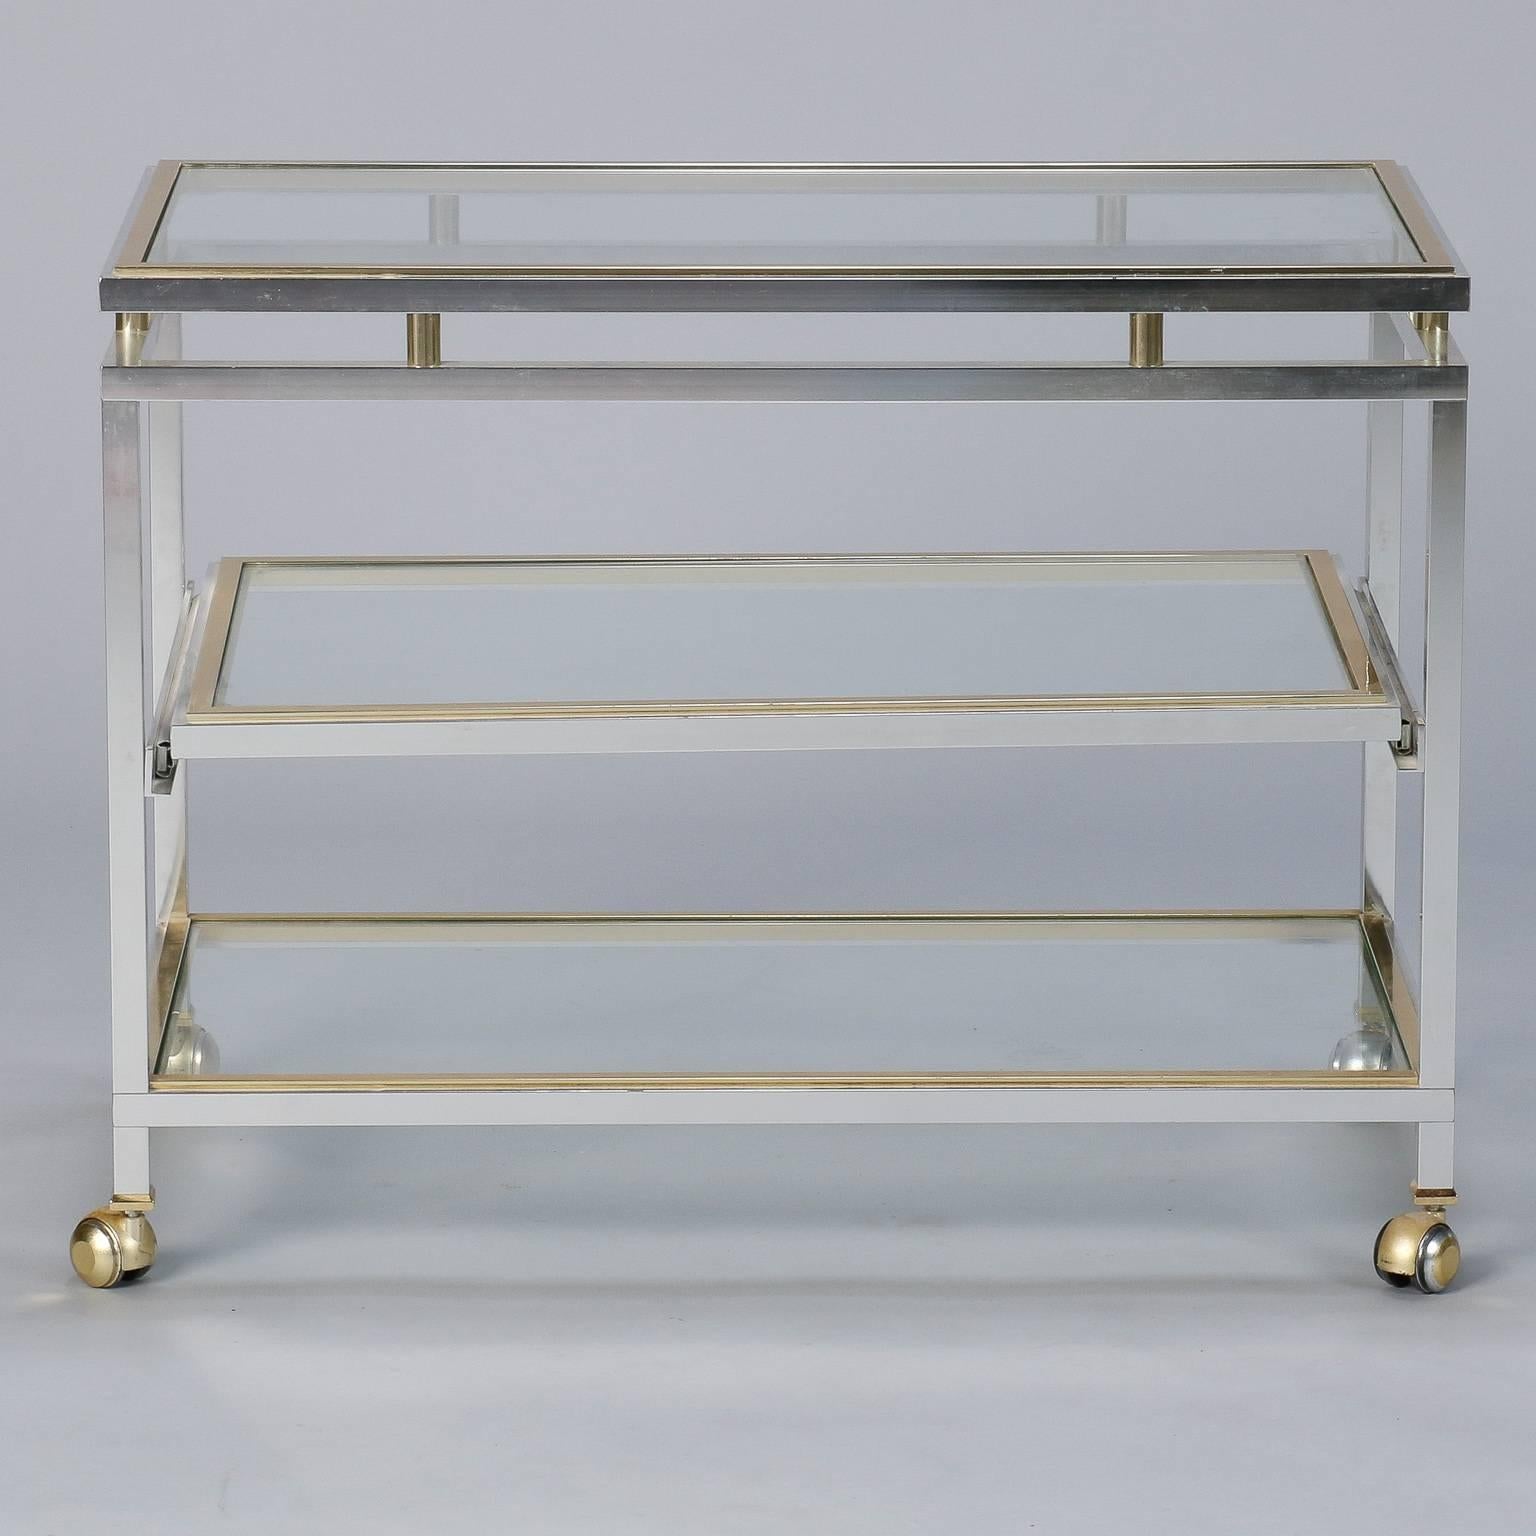 Midcentury Chrome Brass and Glass Serving Trolley in Style of Maison Jansen 1